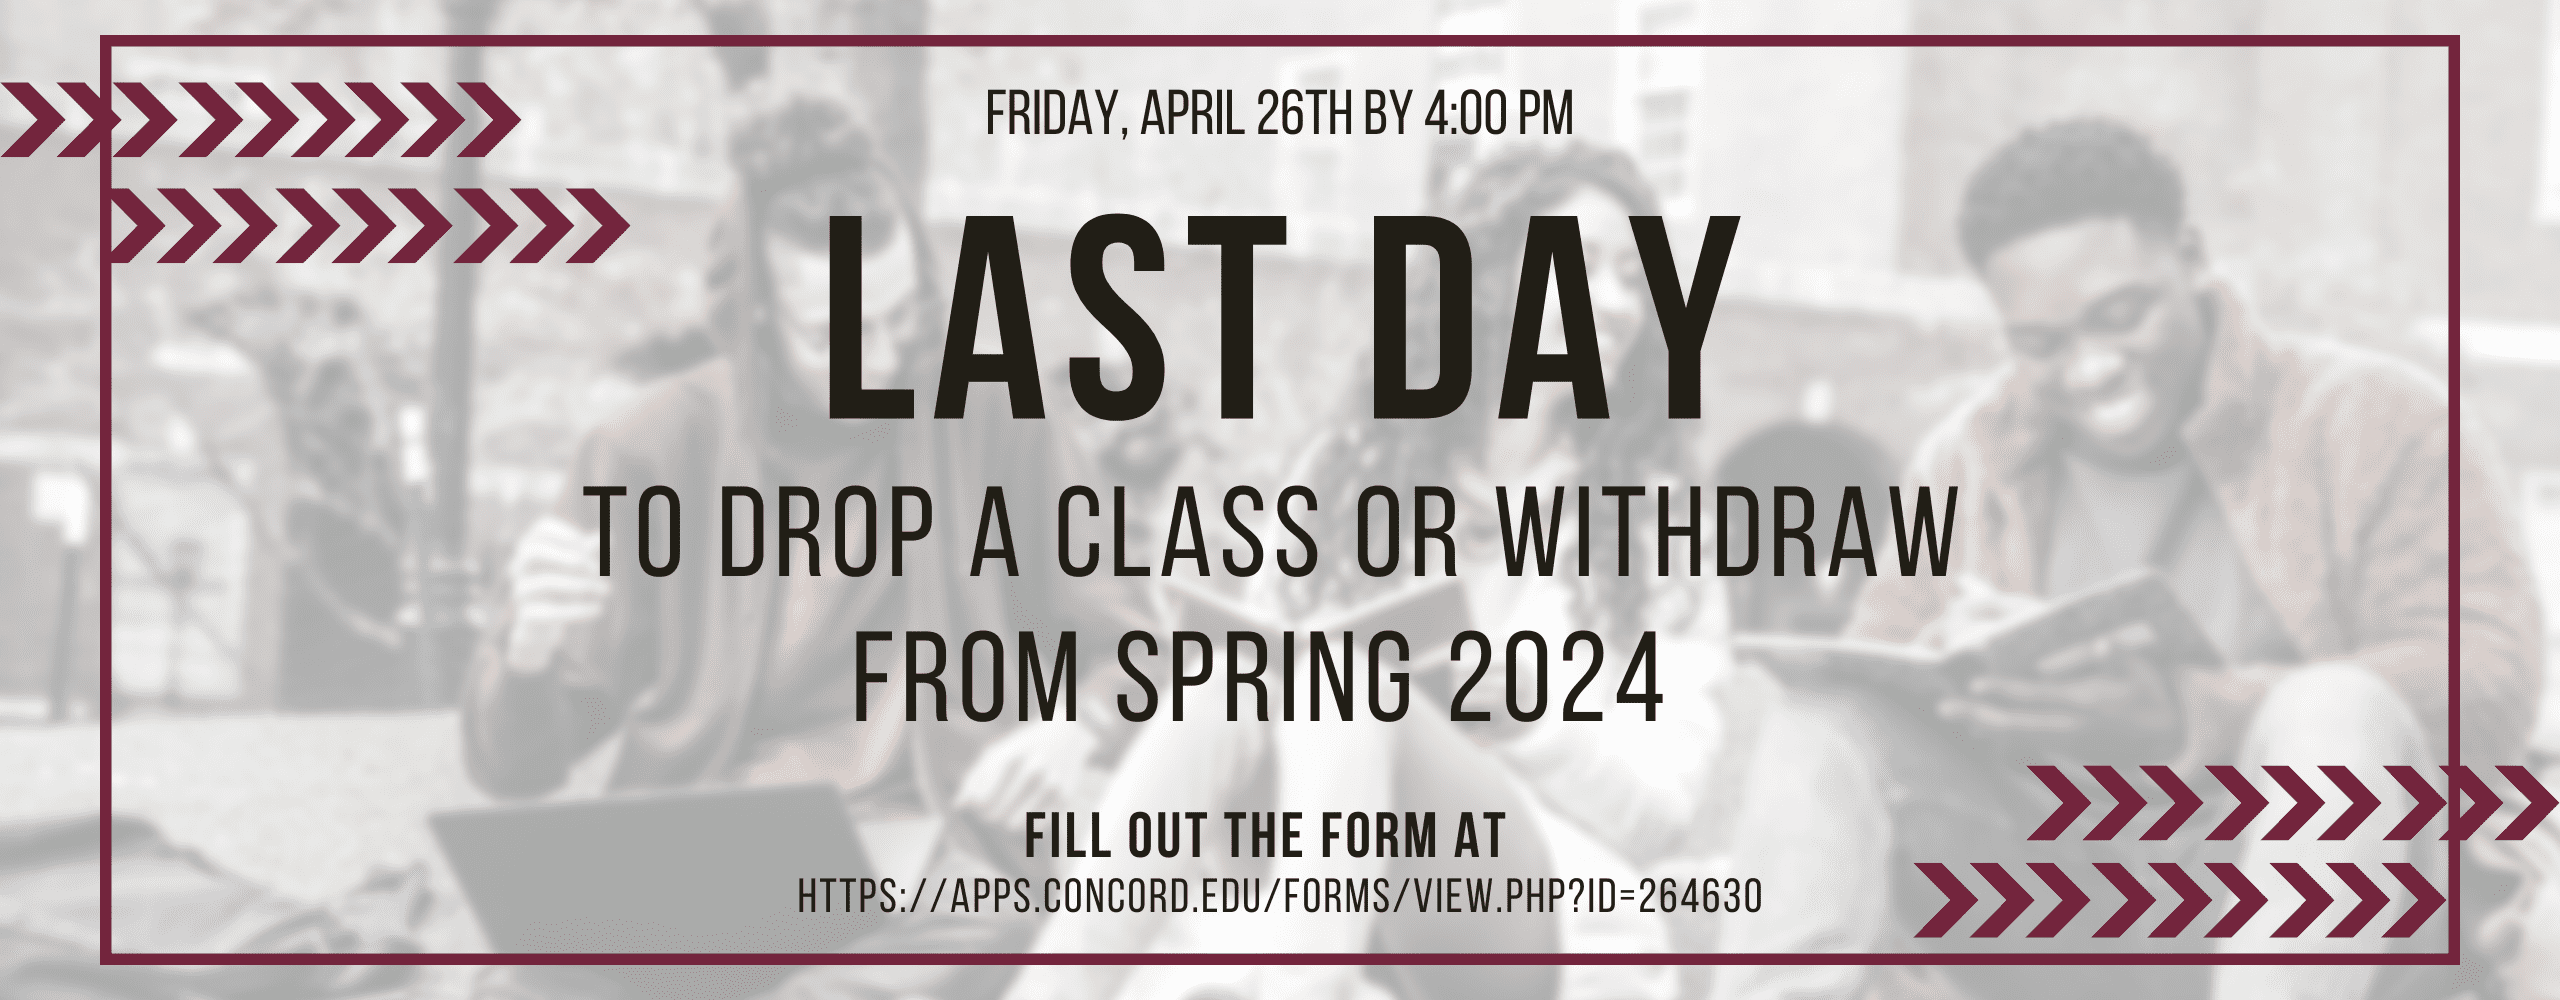 Friday, April 26 2024 by 4:00pm is the last day to drop a class or withdraw from the spring 2024 semester. To withdraw, click here, or fill out the form at https://apps.concord.edu/forms/view.php?id=264630